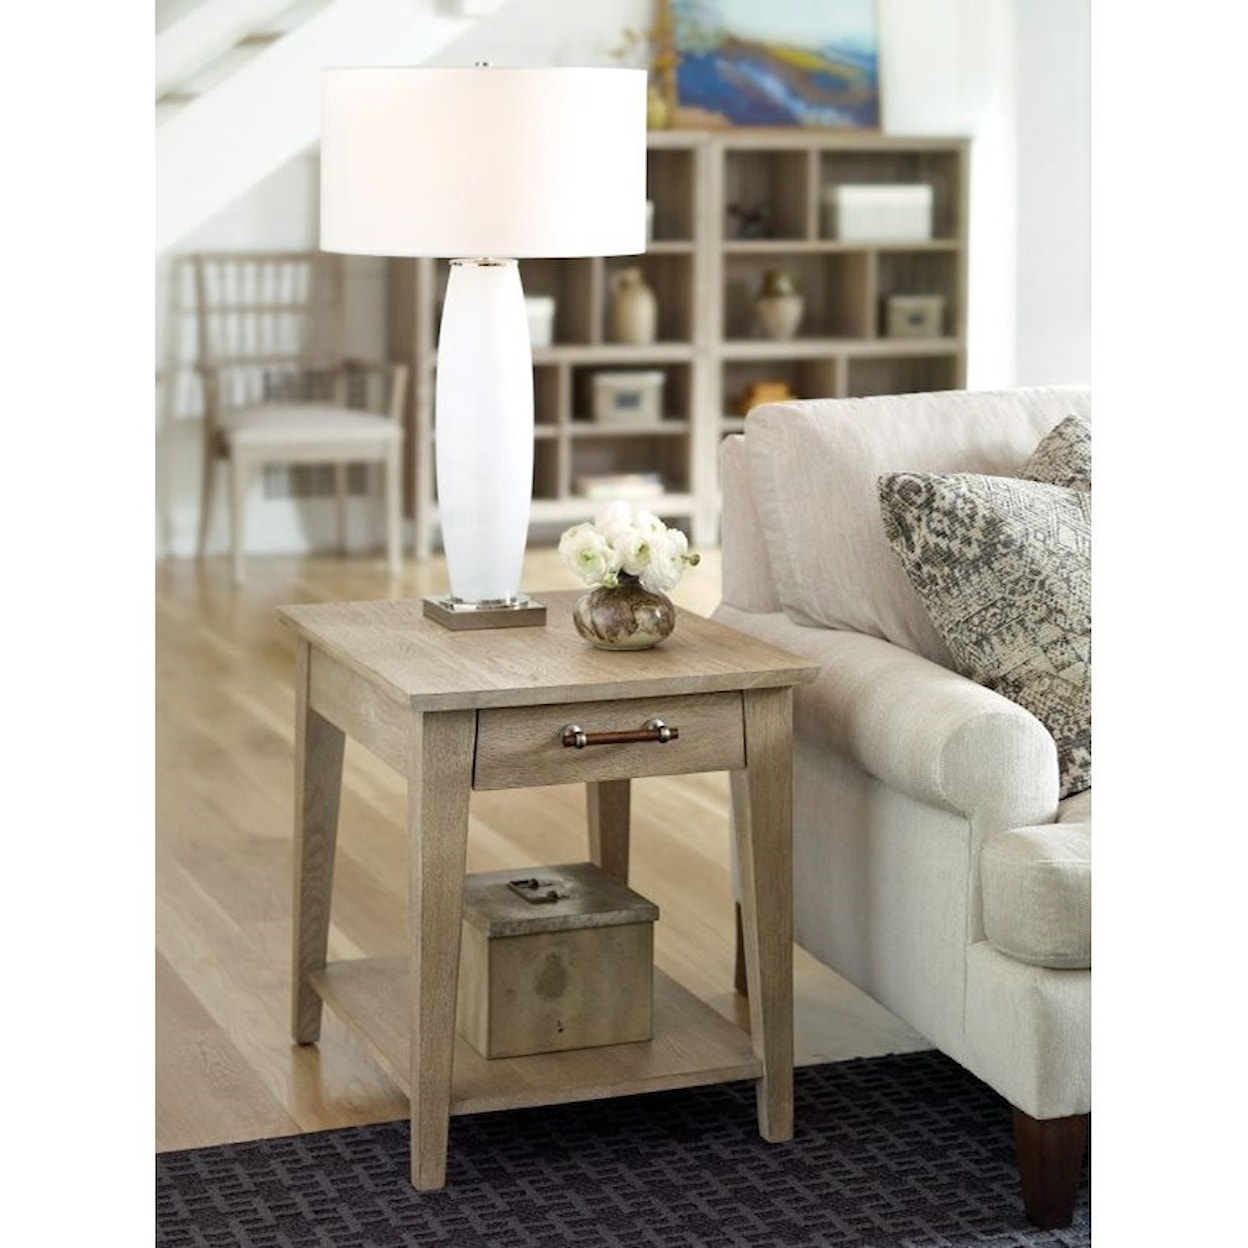 Kincaid Furniture Symmetry Collins Side Table